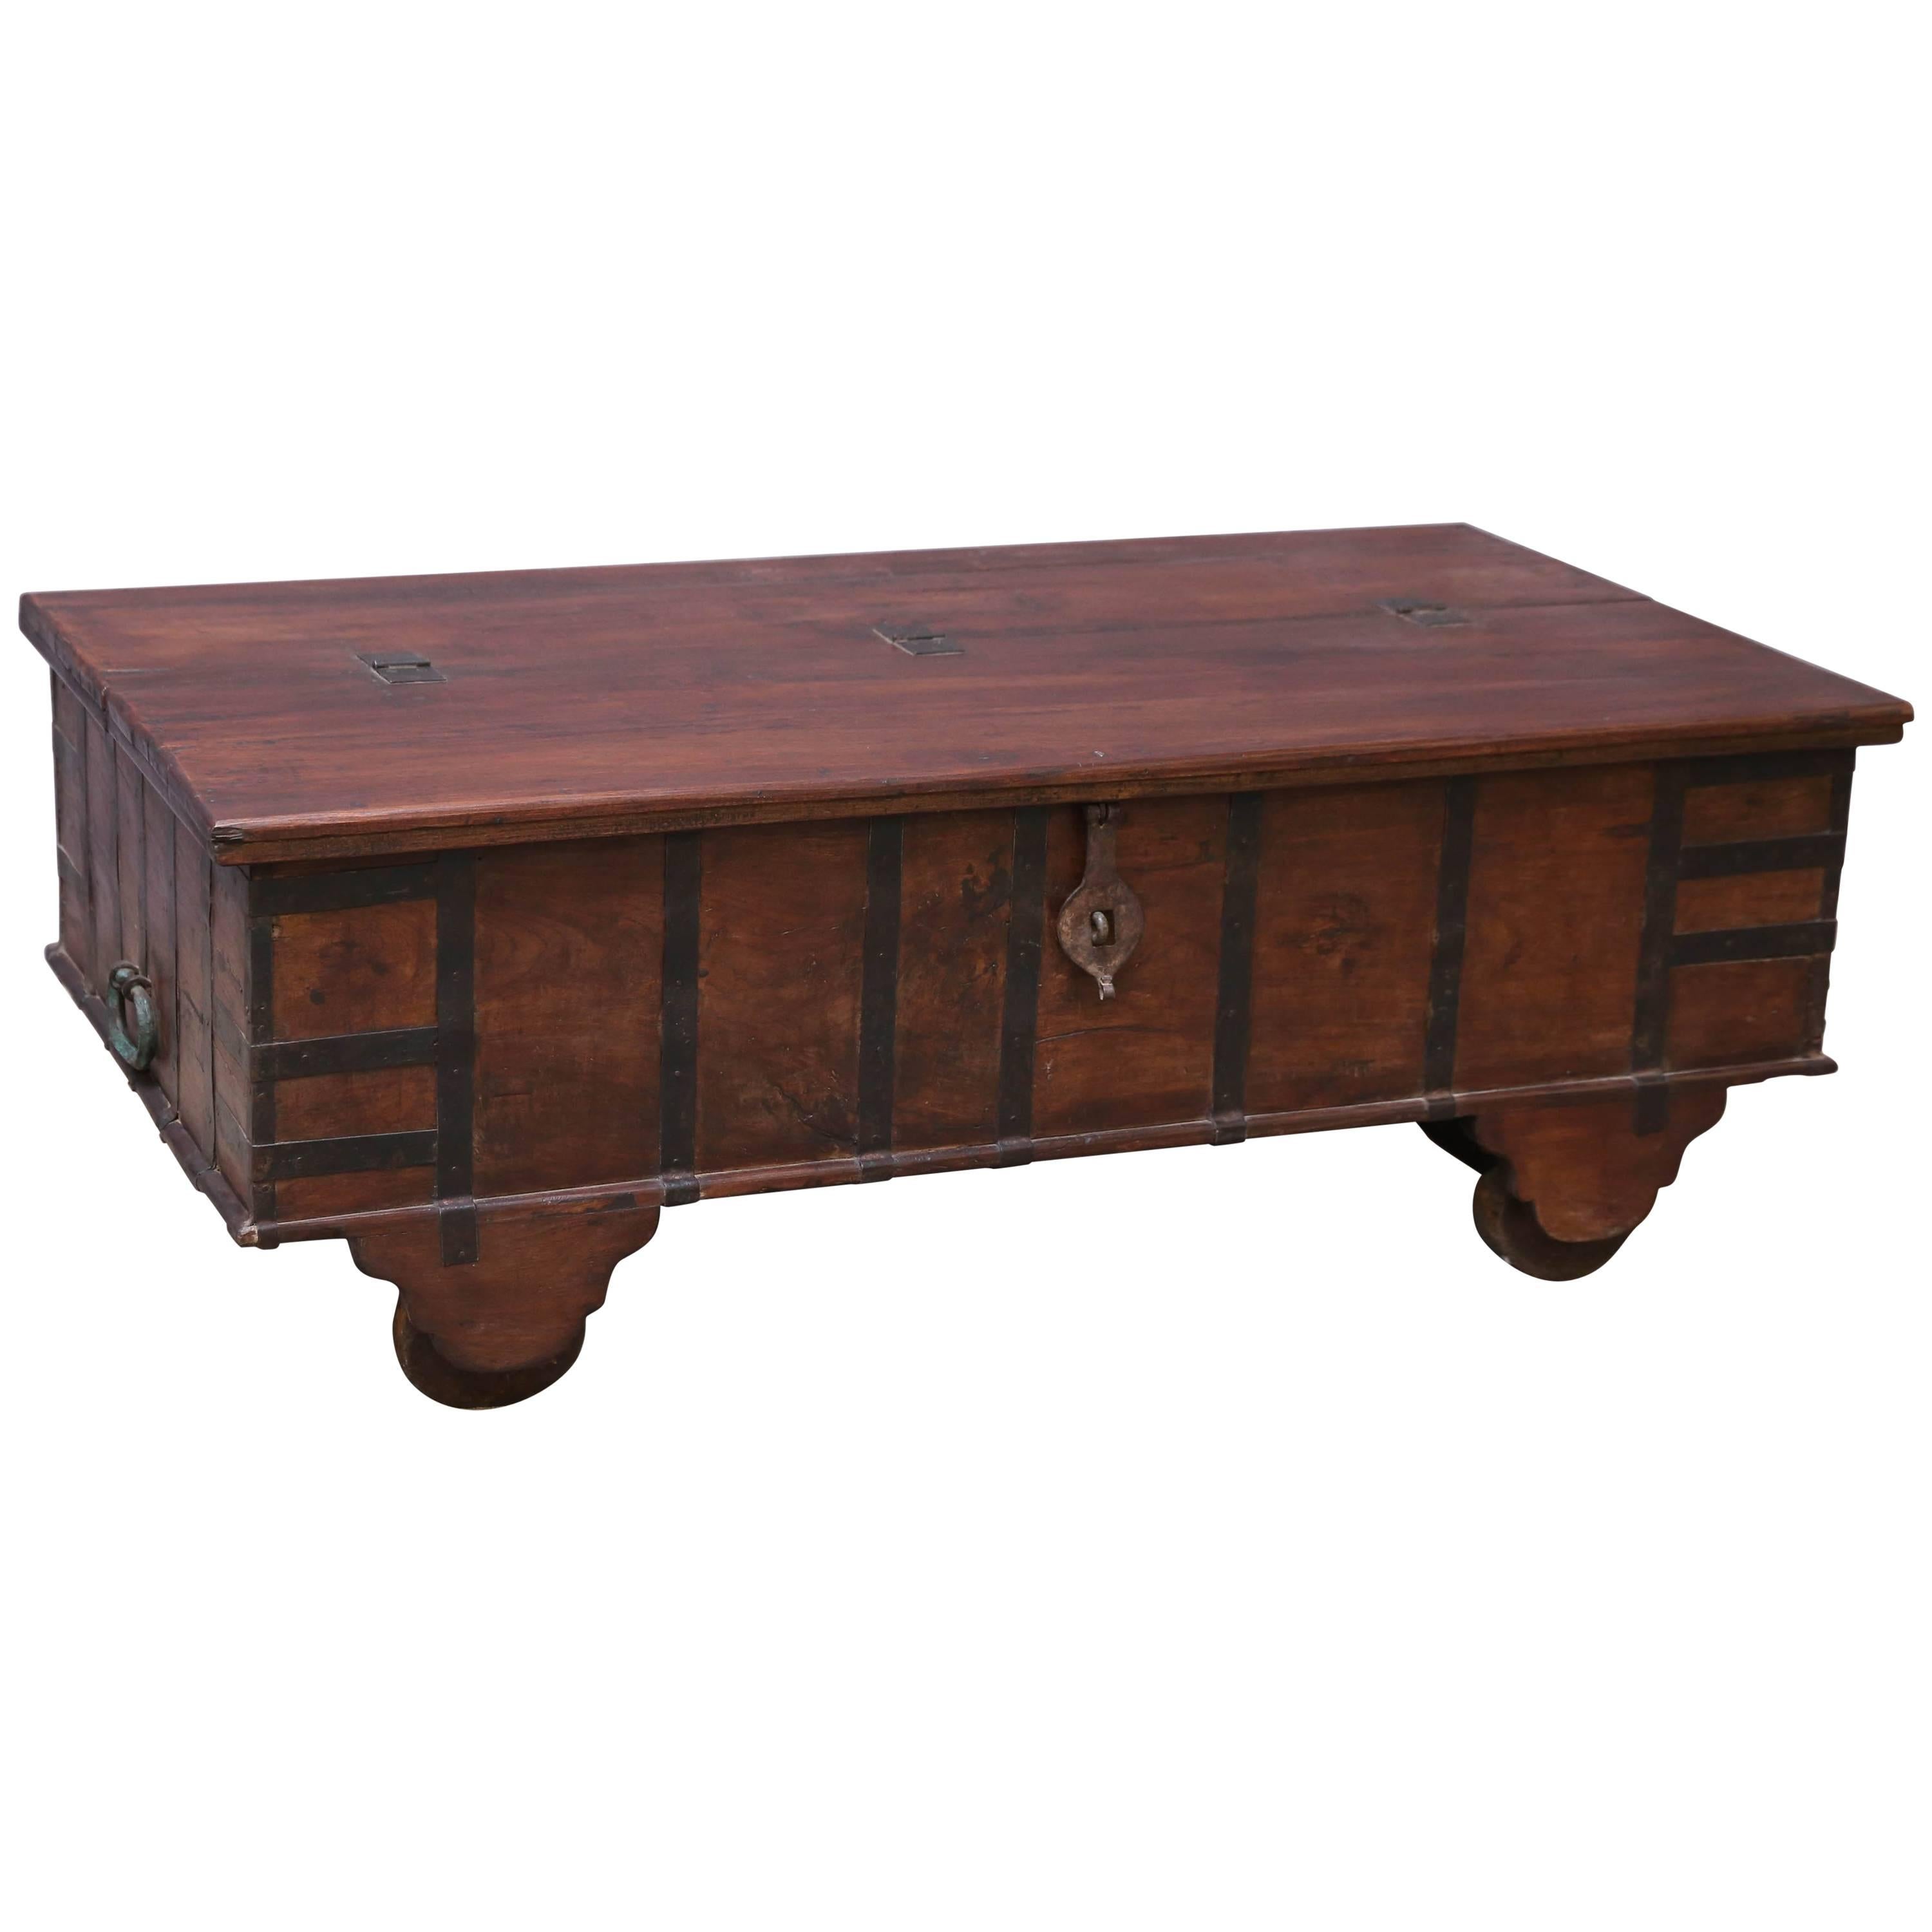 Large Teak Wood Early 19th Century Dowry Chest For Sale